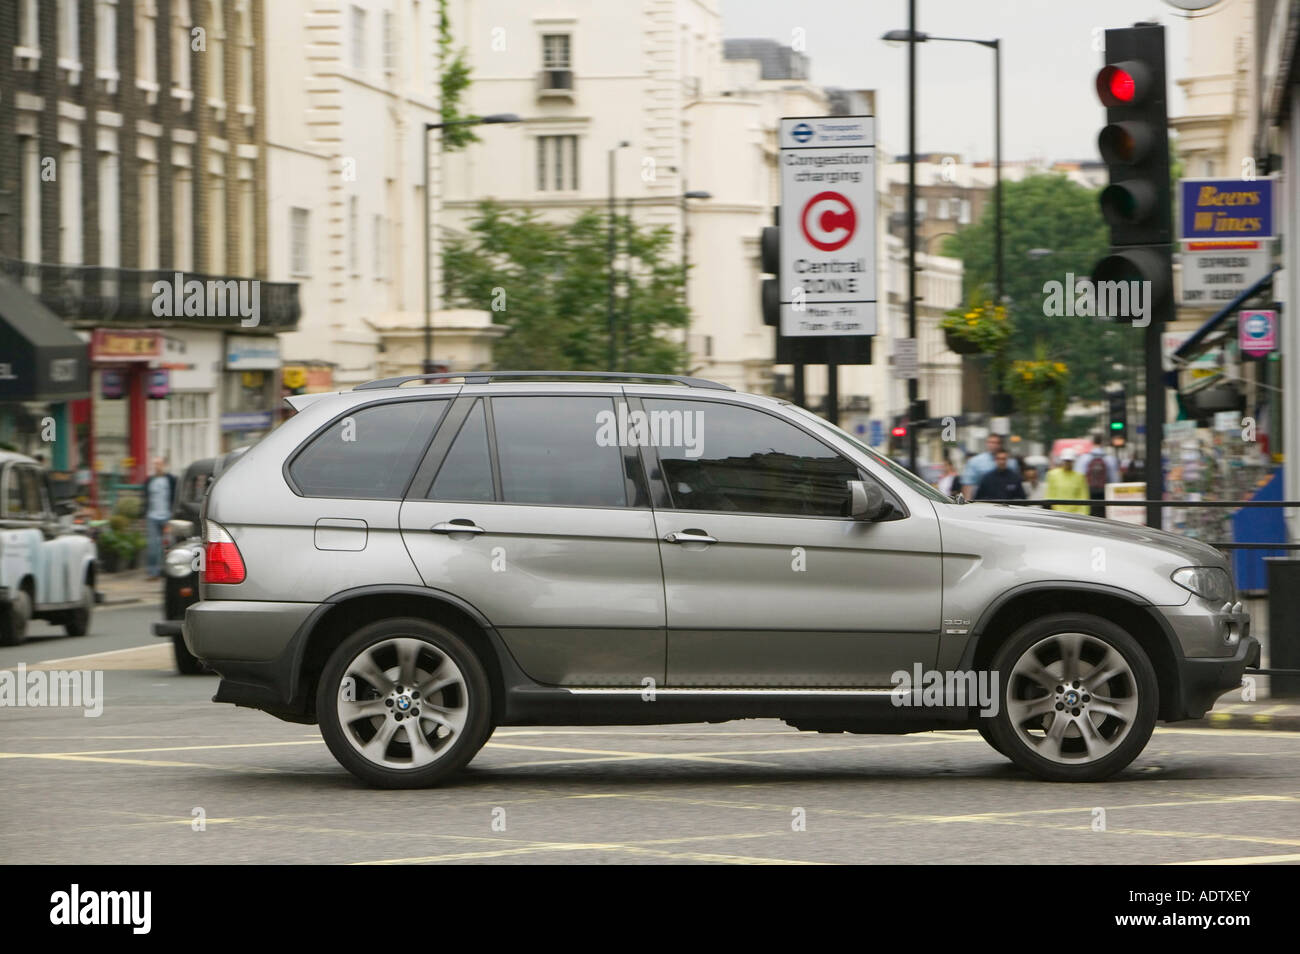 A four wheel drive vehicle in central London UK Stock Photo